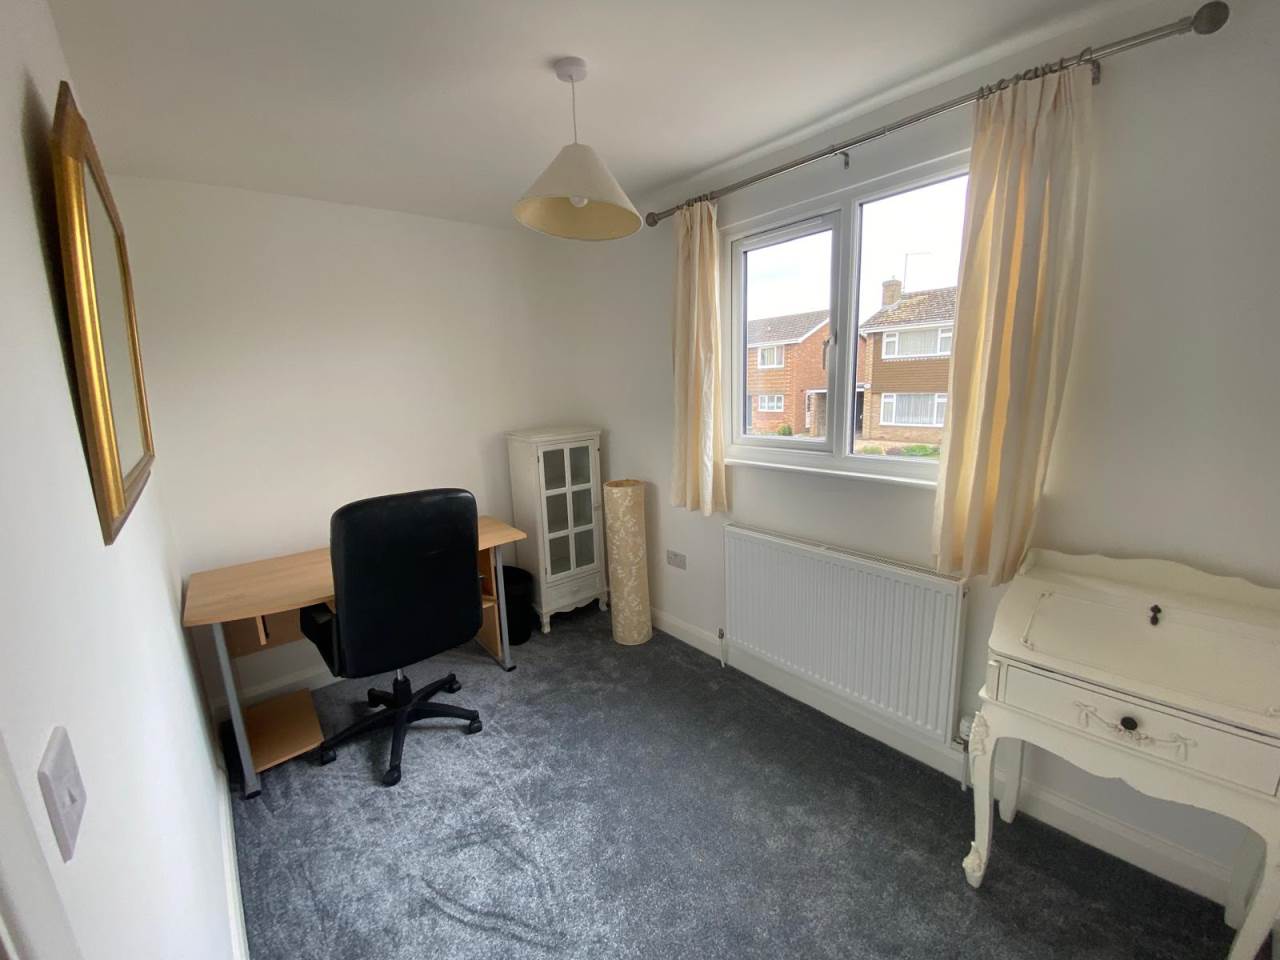 1 bed house / flat share to rent in Lime Grove, Royston  - Property Image 7